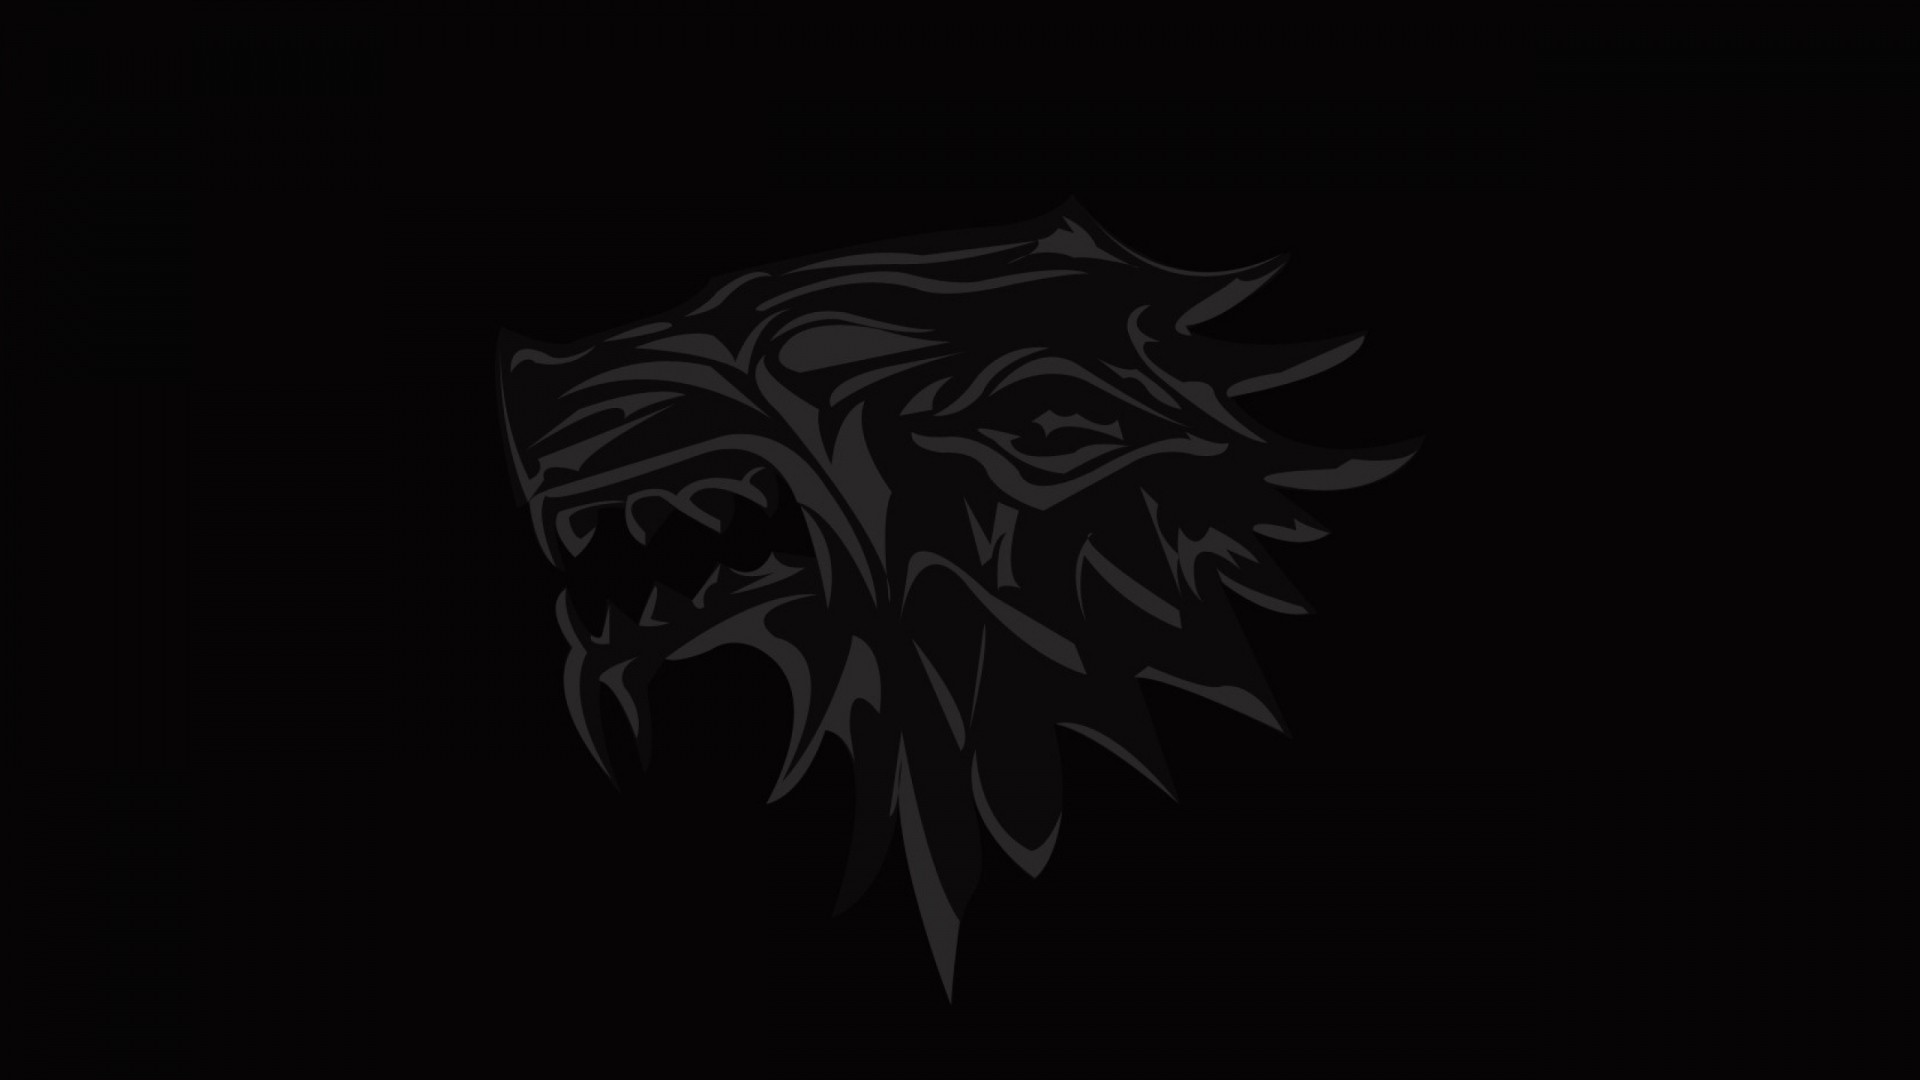 1920x1080 ... Background Full HD 1080p.  Wallpaper house of stark, game of  thrones, logo, emblem, wolf